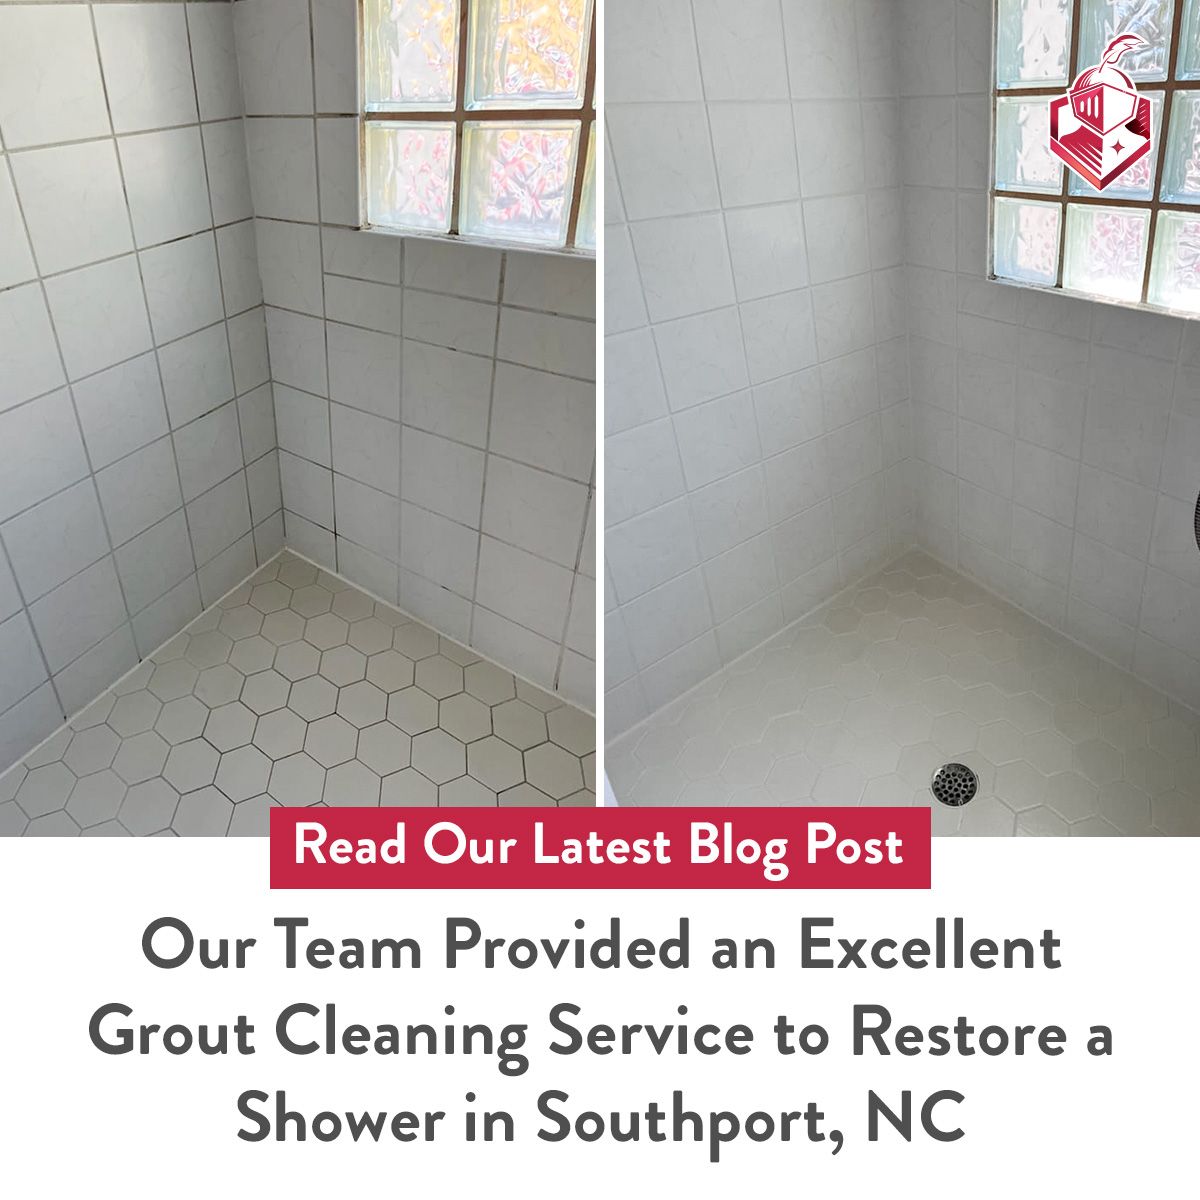 Our Team Provided an Excellent Grout Cleaning Service to Restore a Shower in Southport, NC